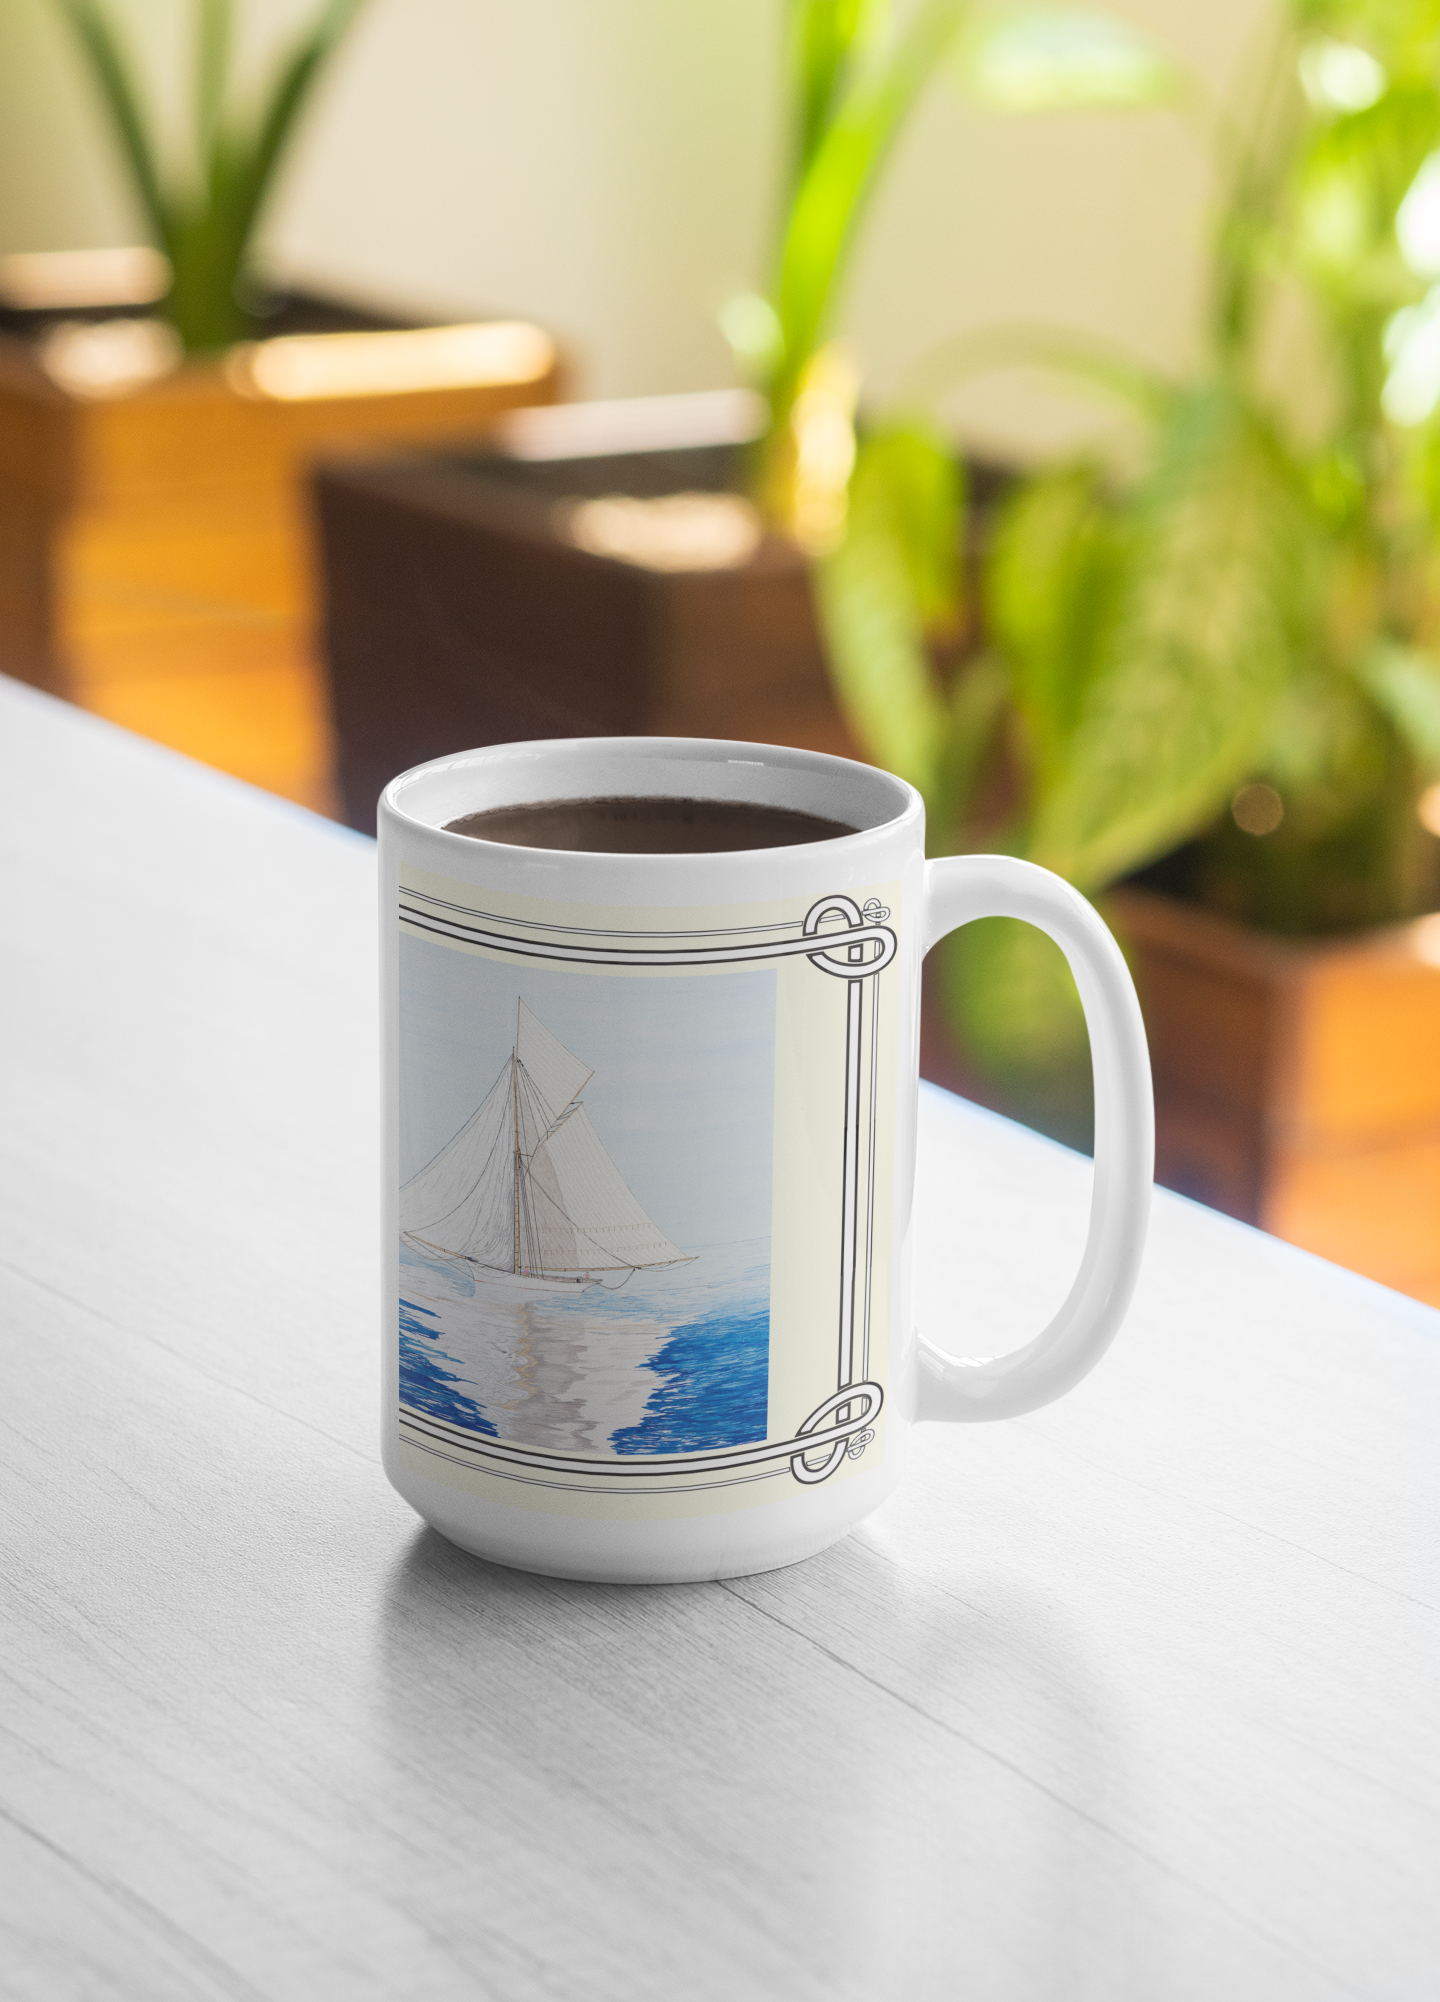 A cutter is becalmed on the run as the racer waits for a breeze on the dlownward leg of the race. The Becalmed 15 ounce mug is a reproduction of a watercolor painting by Lee M. Buchanan.